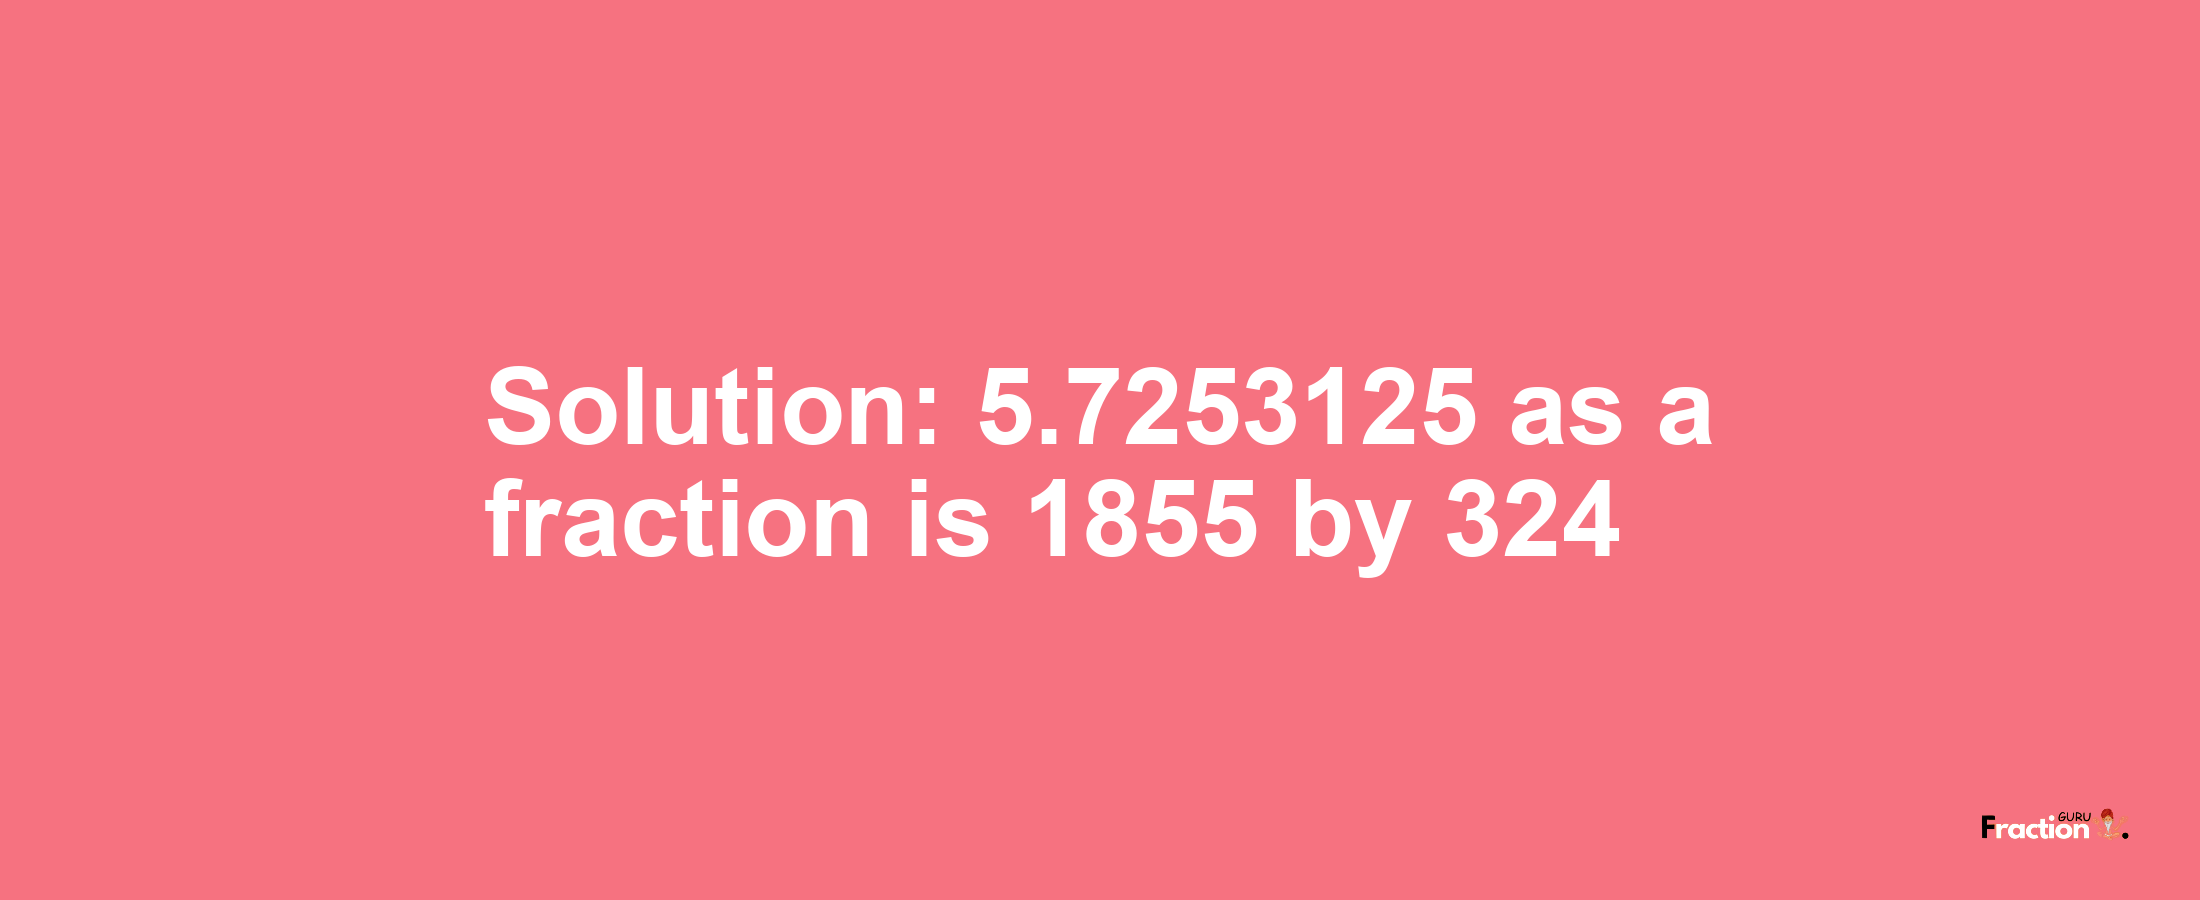 Solution:5.7253125 as a fraction is 1855/324